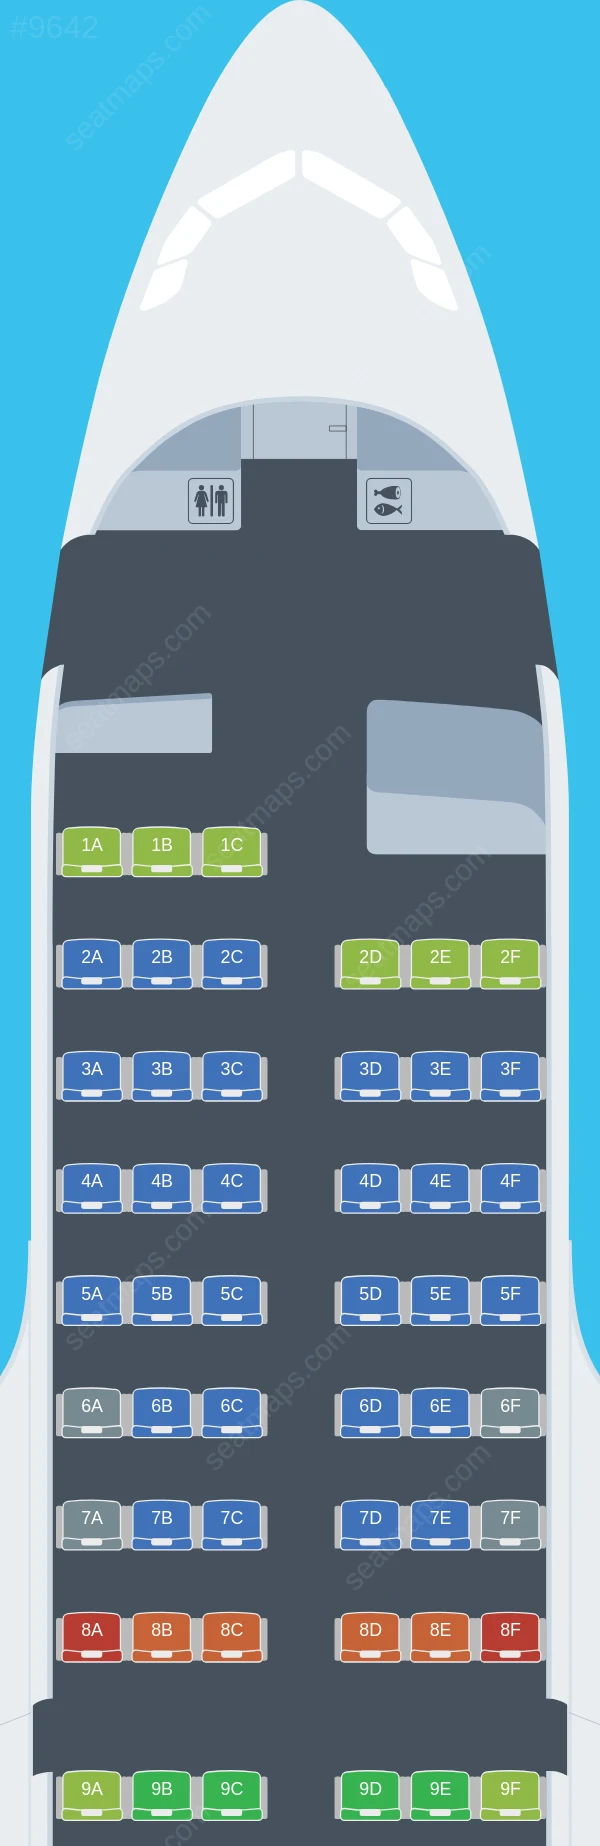 Tarom Airbus A318-100 seatmap preview